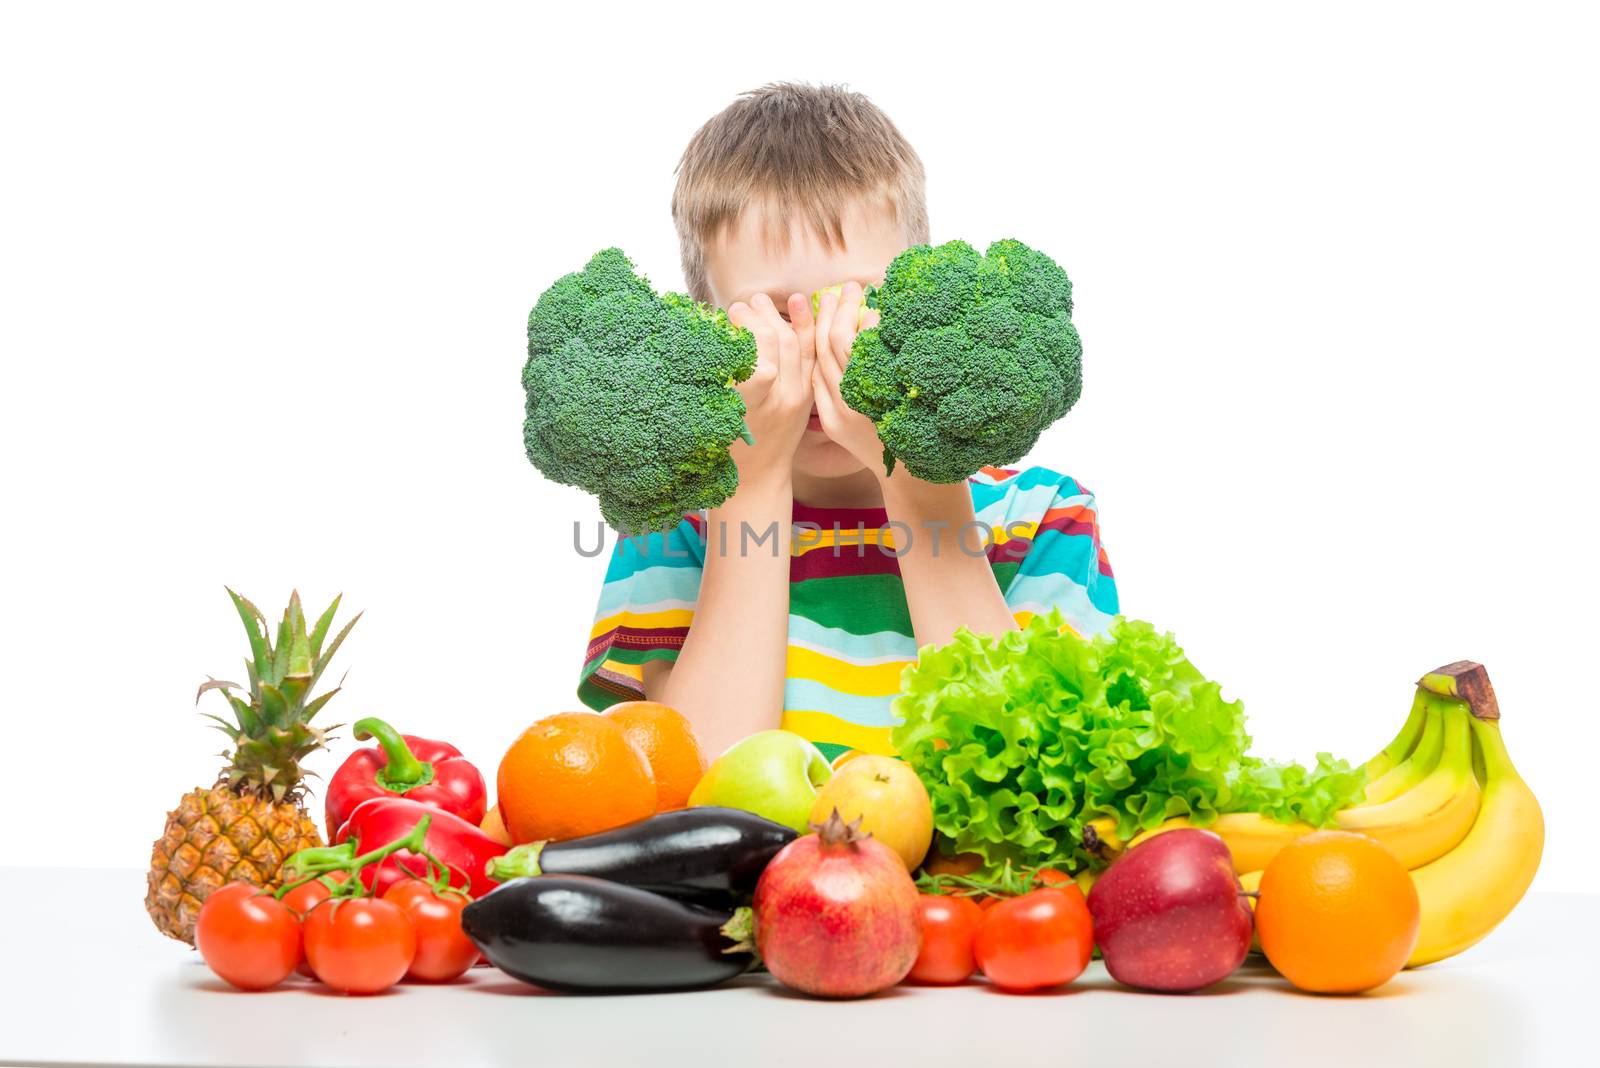 Boy playing with broccoli and a bunch of vegetables and fruits p by kosmsos111